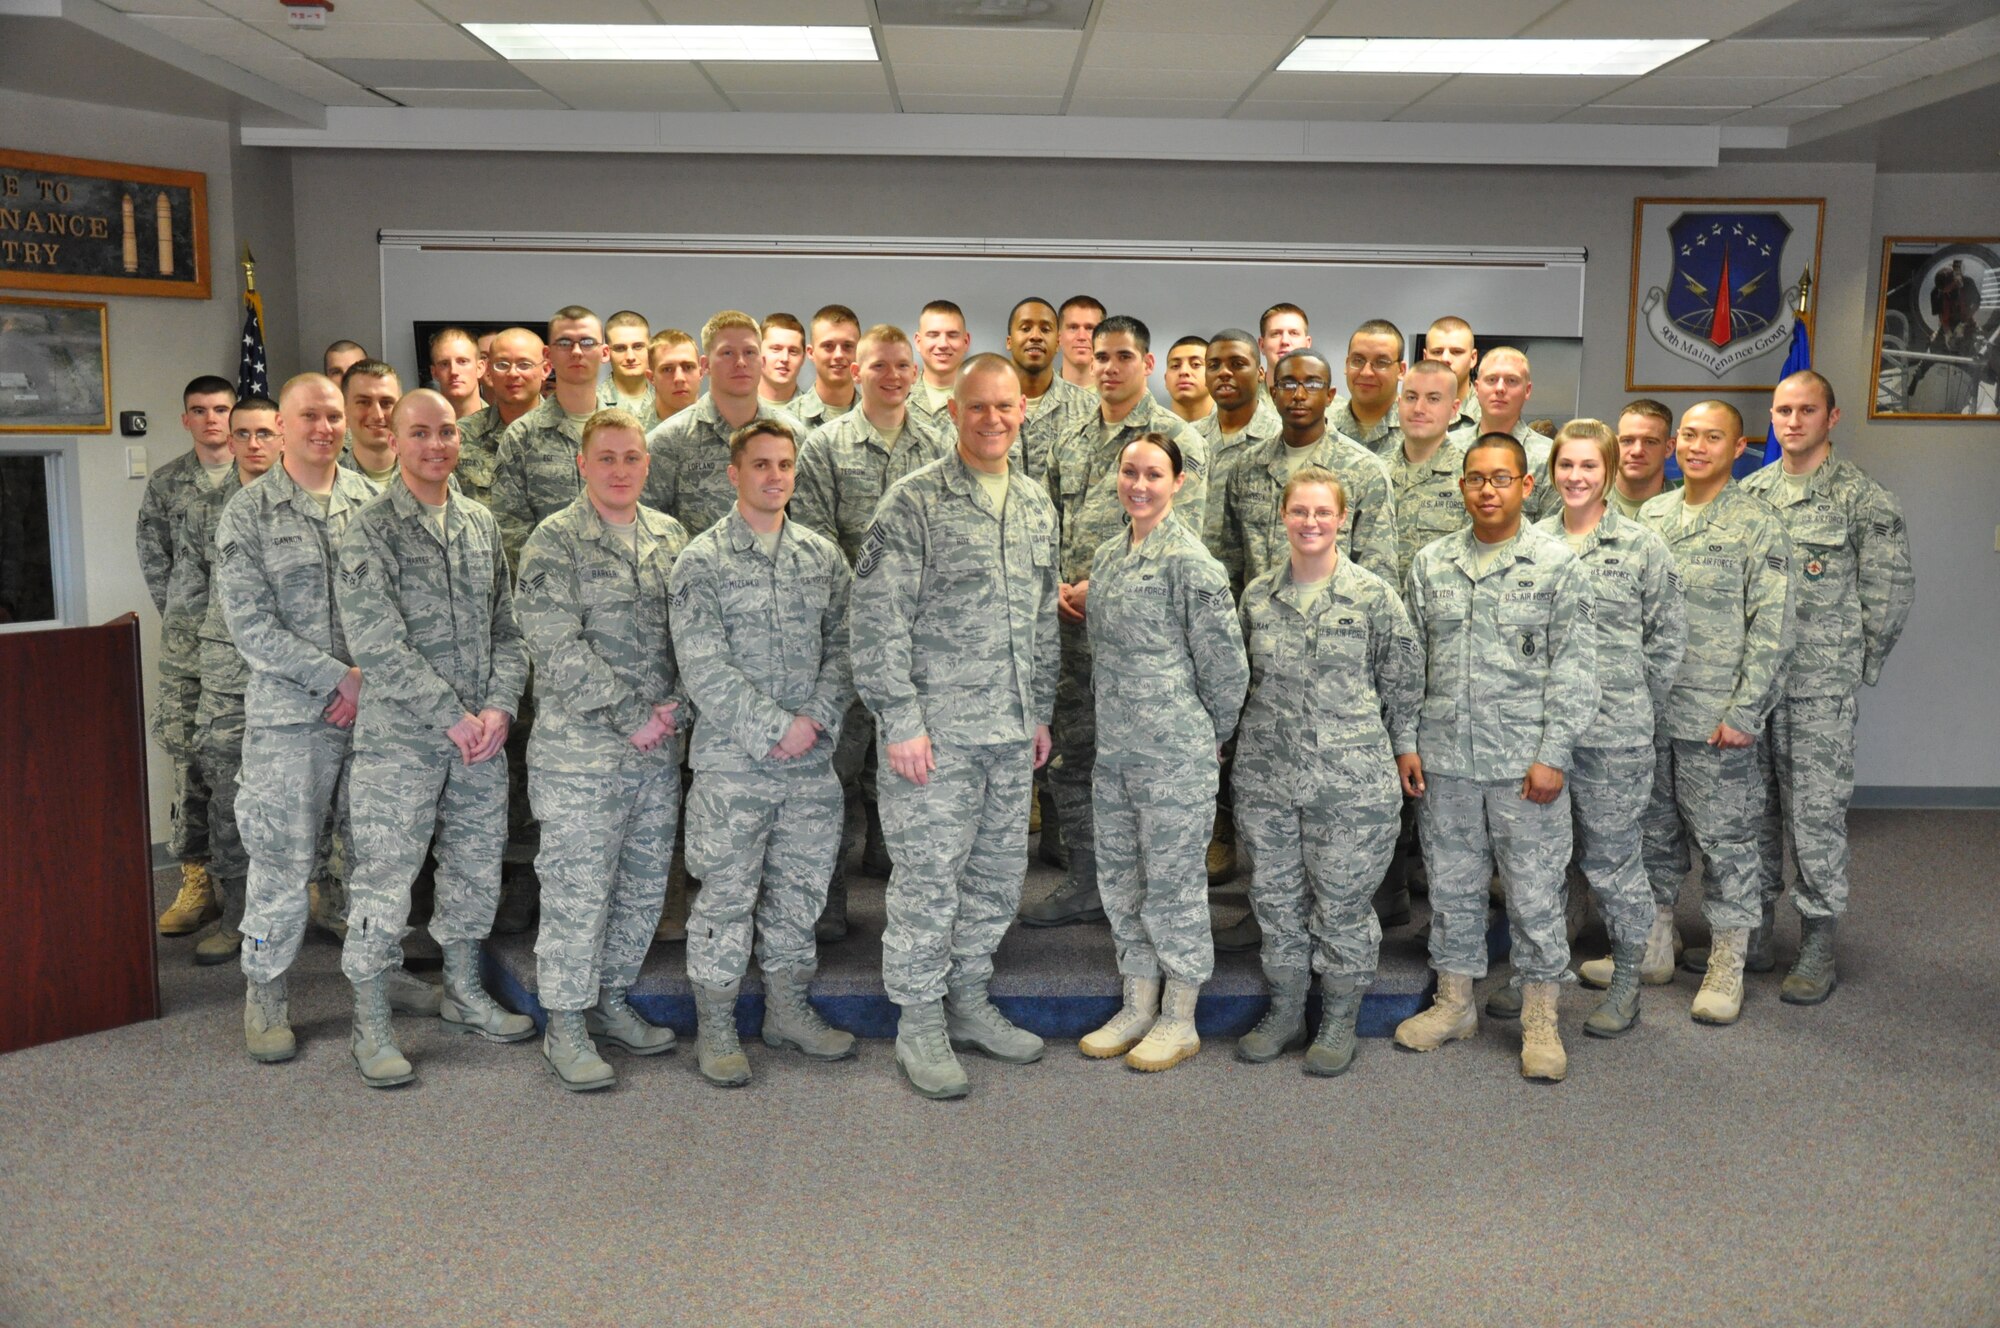 Chief Master Sgt. of the Air Force James Roy visits with Airmen attending the Airmen Leadership School and the First Term Airmen's Center March 2, 2011, at F.E. Warren Air Force Base, Wyo.  (U.S. Air Force photo/Staff Sgt. Mike Tryon)